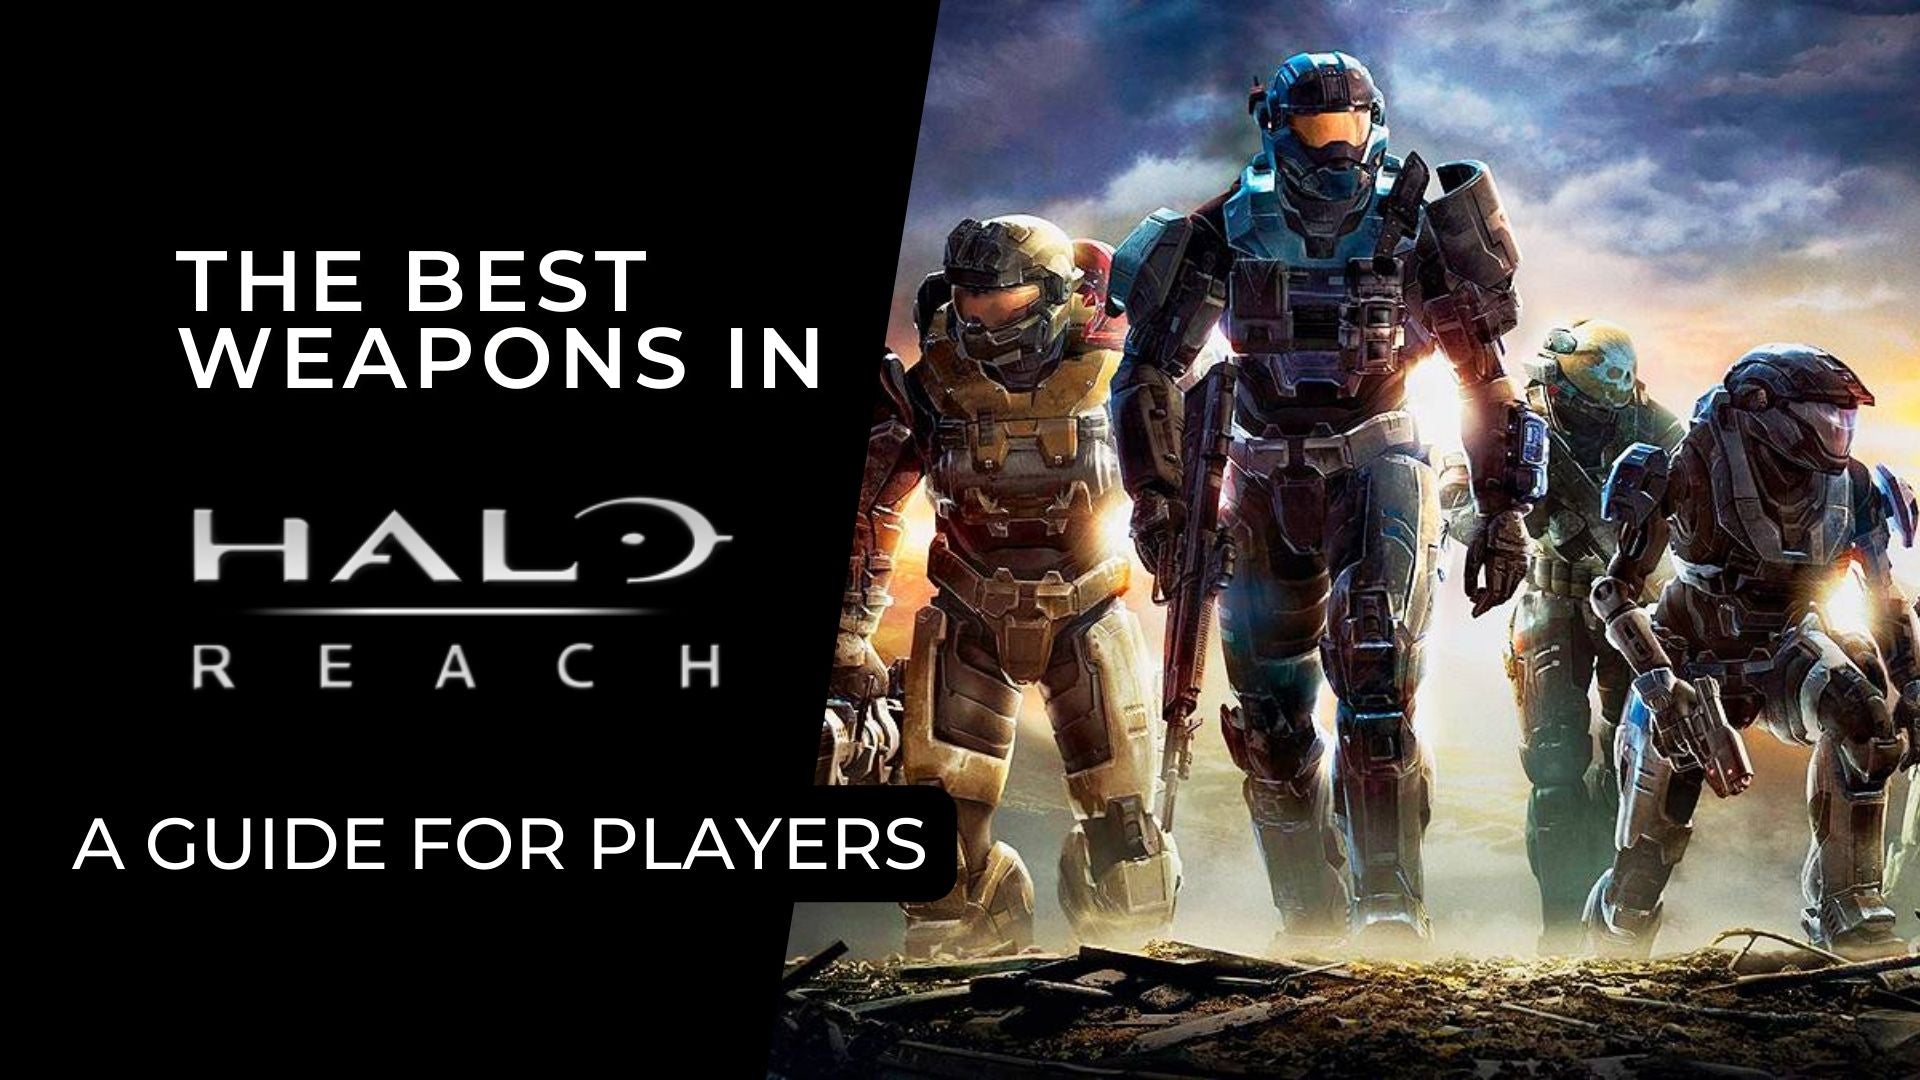 Halo: Reach' more fun with more than one